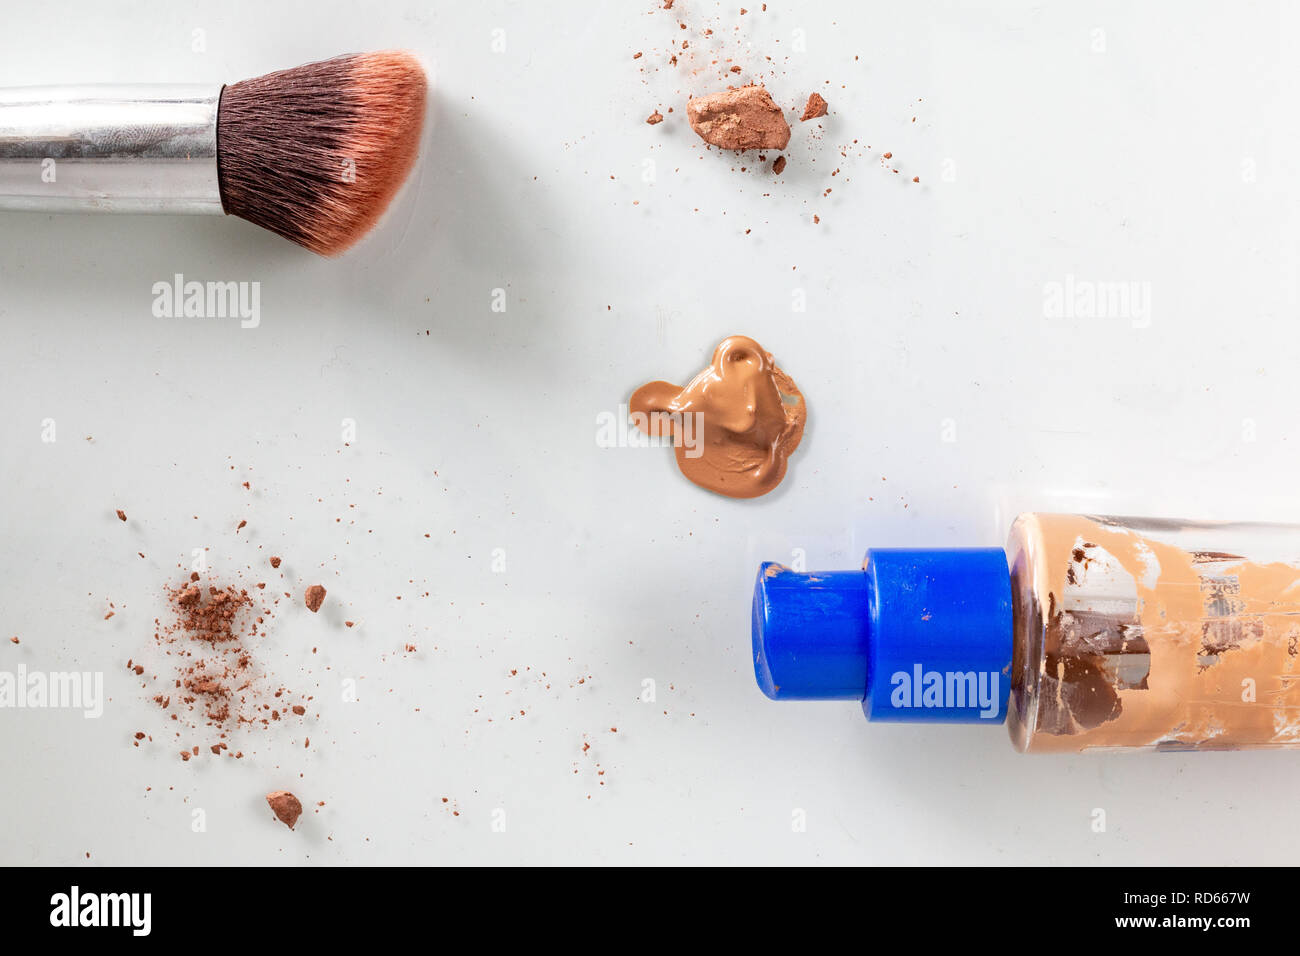 flat lay of makeup showing a makeup brush and glass bottle, surrounded by scattered makeup. Stock Photo